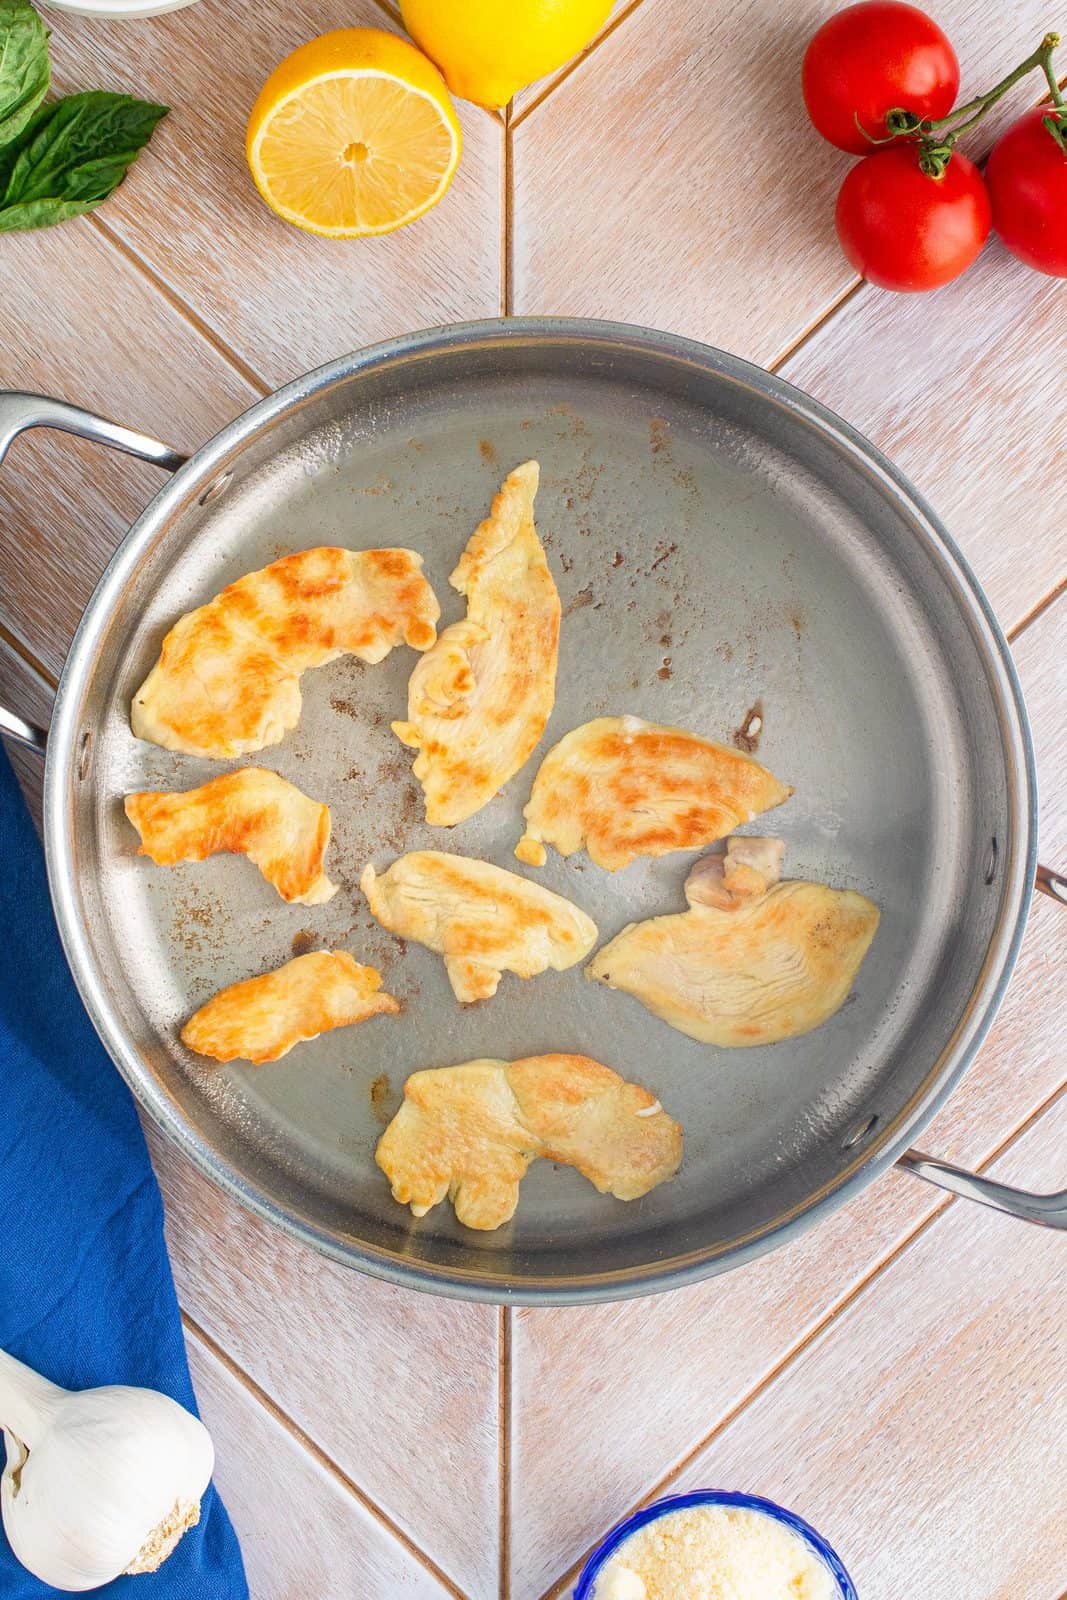 Chicken pieces being browned with olive oil in pan.